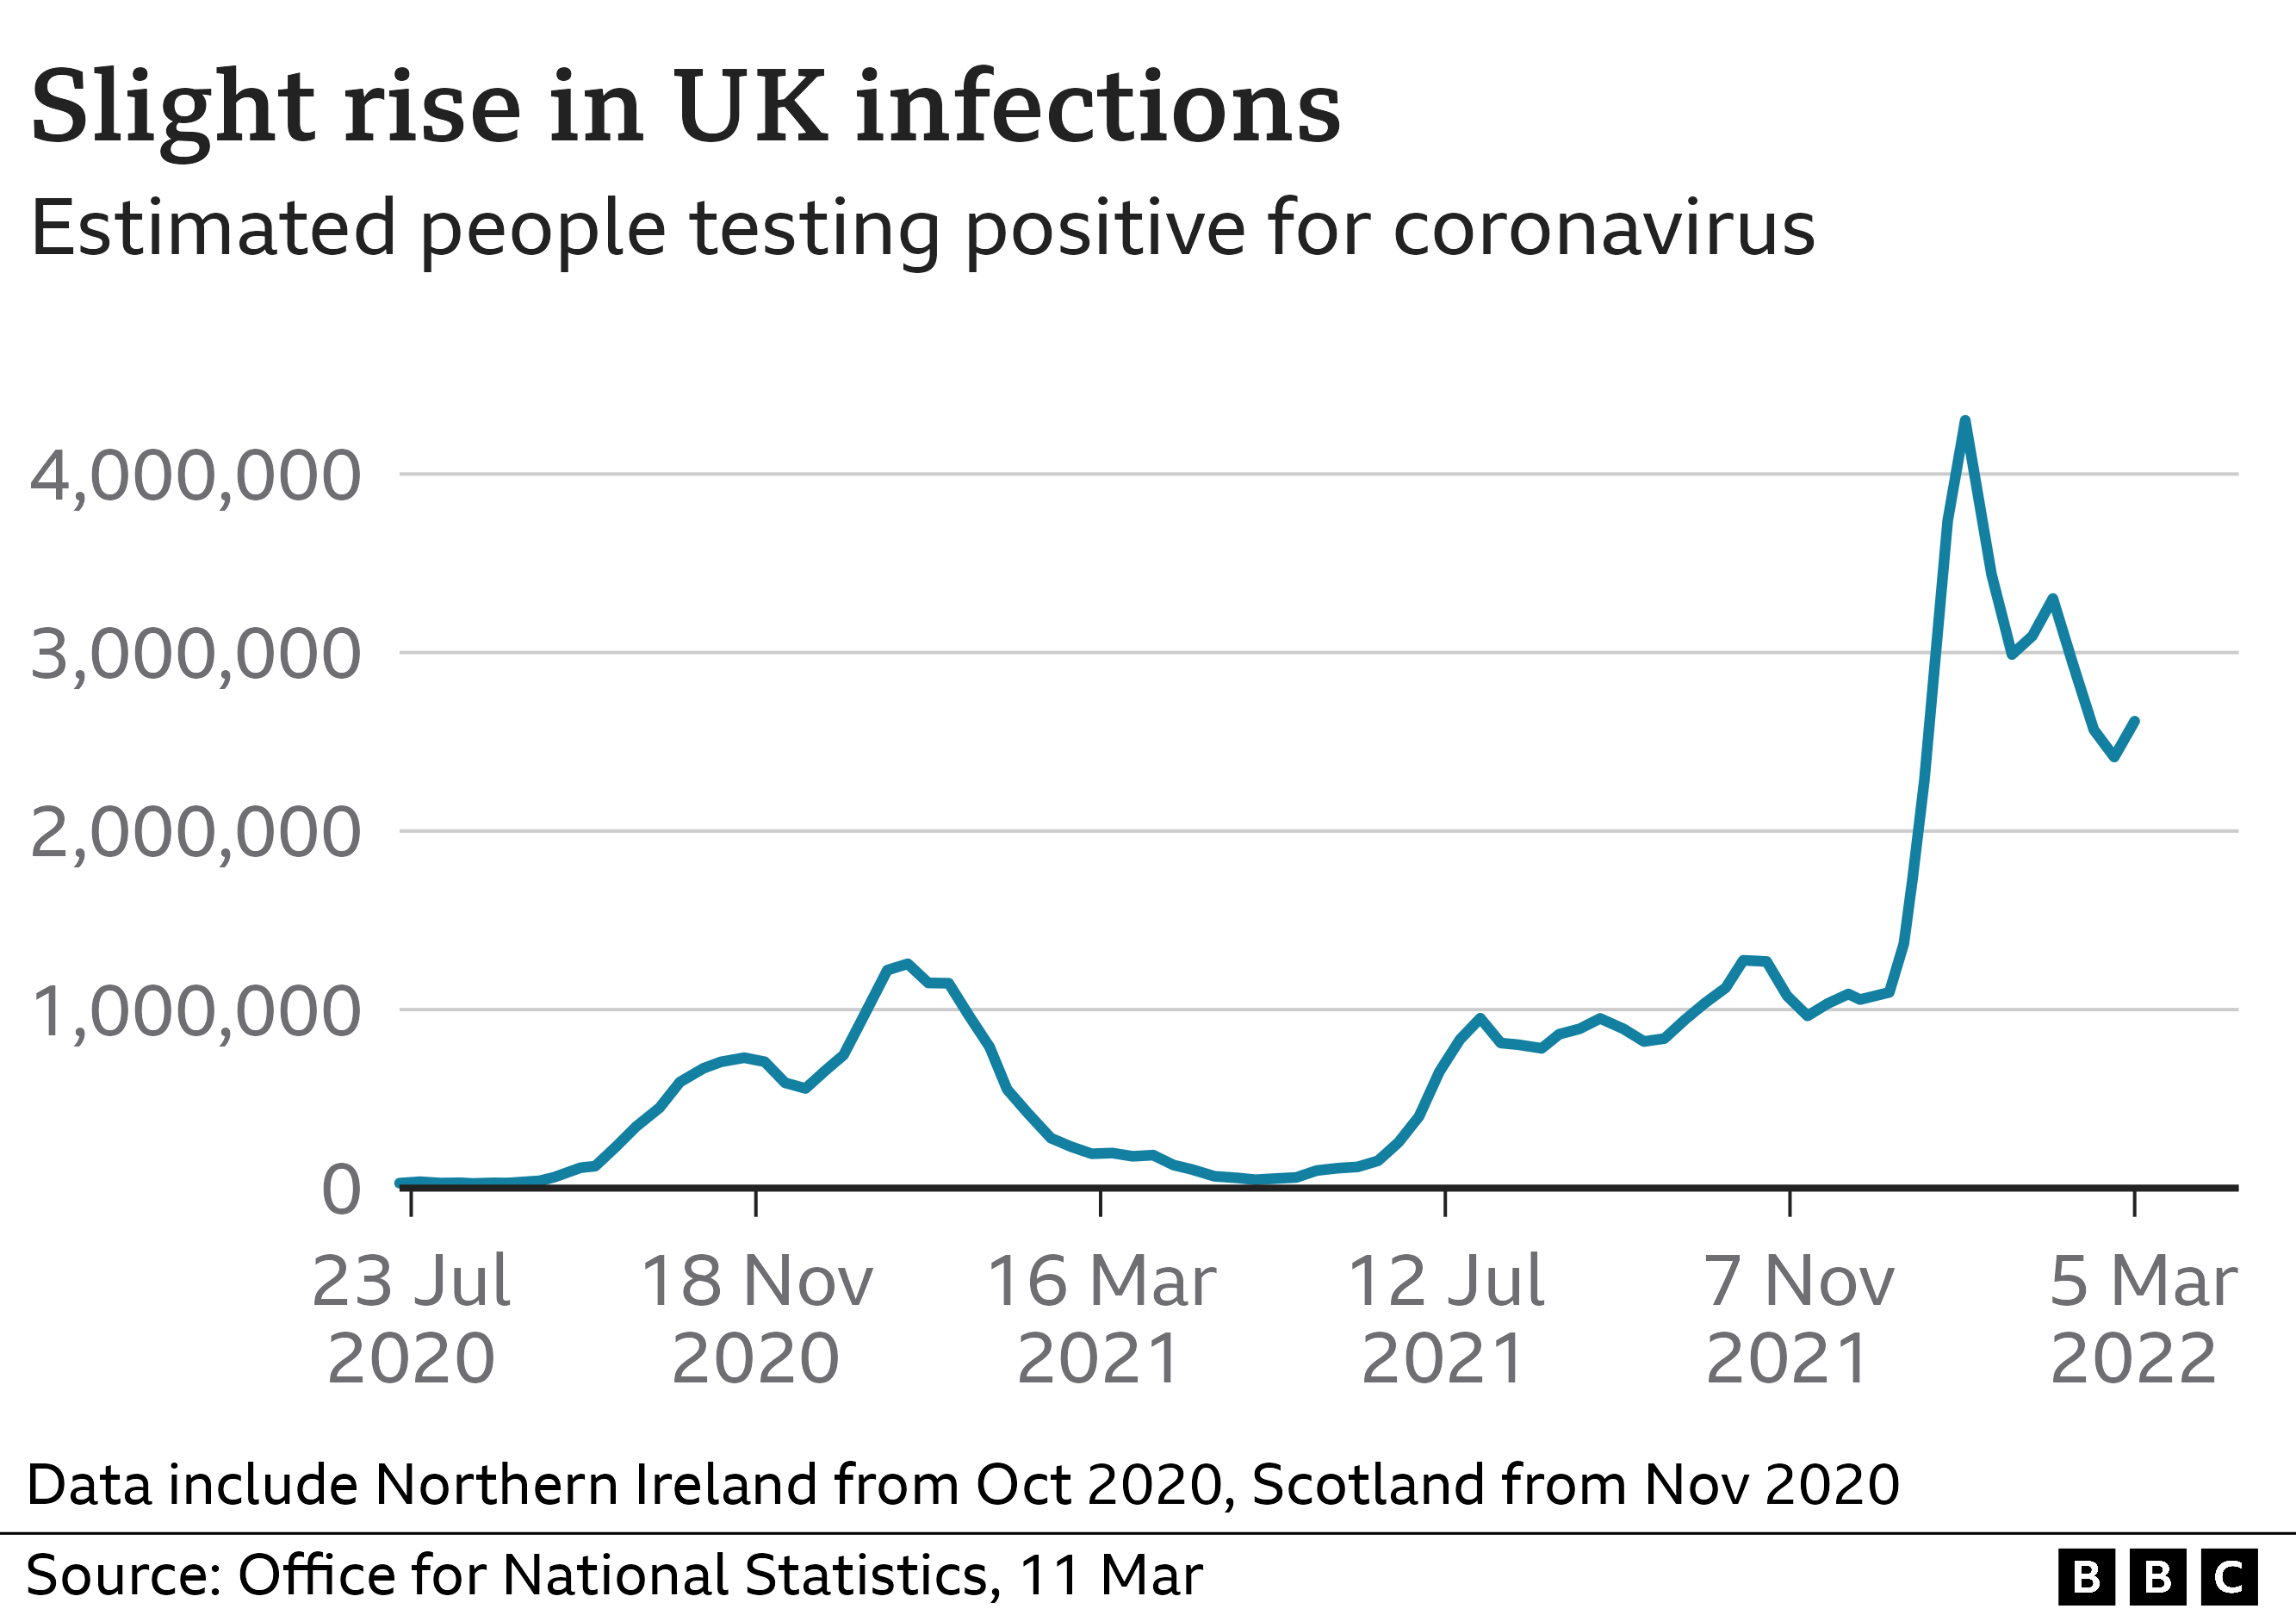 Graph showing a rise in Covid infections in the UK since the end of February